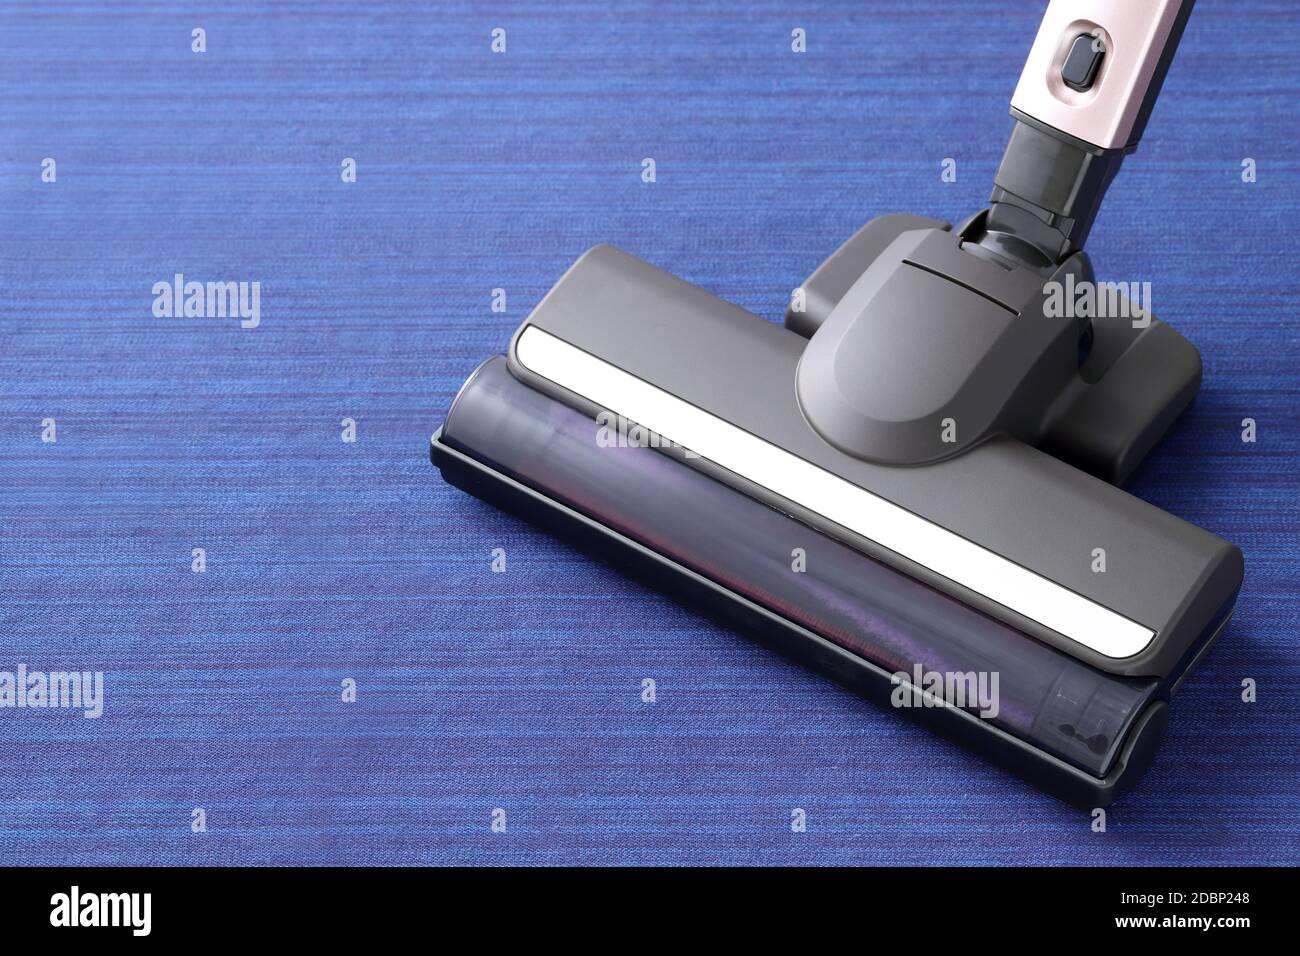 Head of modern vacuum cleaner on blue carpet background. Close up. Stock Photo